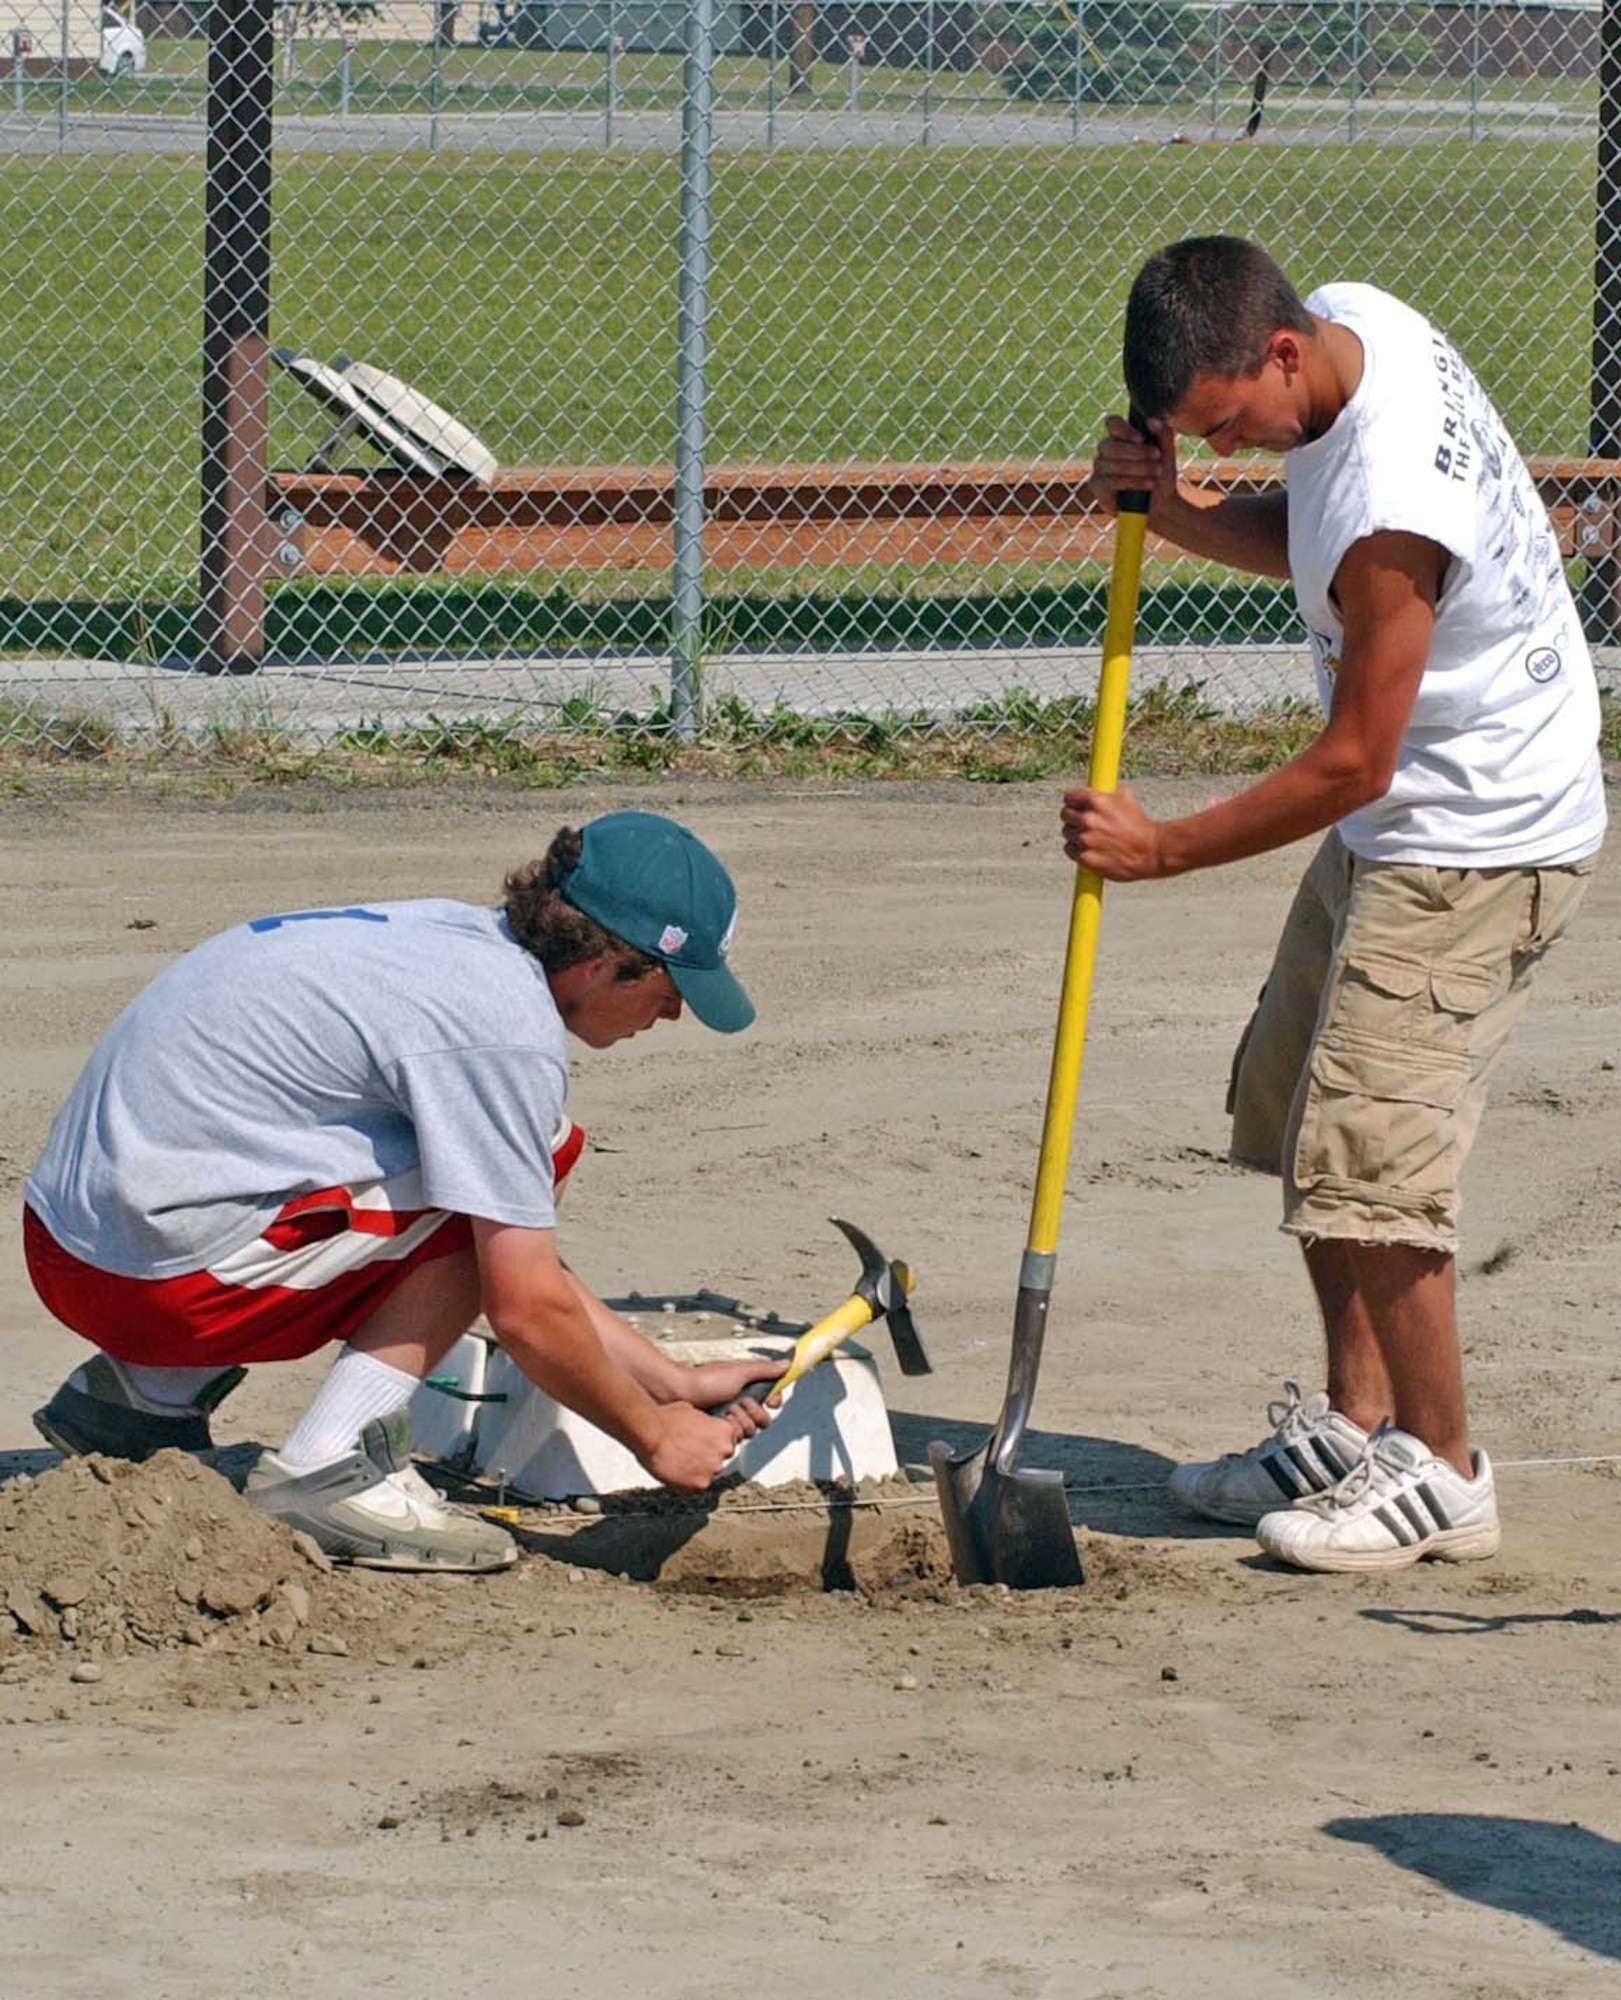 EIELSON AIR FORCE BASE, Alaska--Ken Sample and Dewel Pettway, Interior Girls Softball Association field workers, use a shovel and pick-ax to dig a hole for first base at the Ben Eielson Softball Field June 29. The Raven's softball field recently recieved a complete upgrade which involved removing sharp stones from the field and replacing it with a special in-field mix of dirt. (U.S. Air Force photo by Senior Airman Justin Weaver)